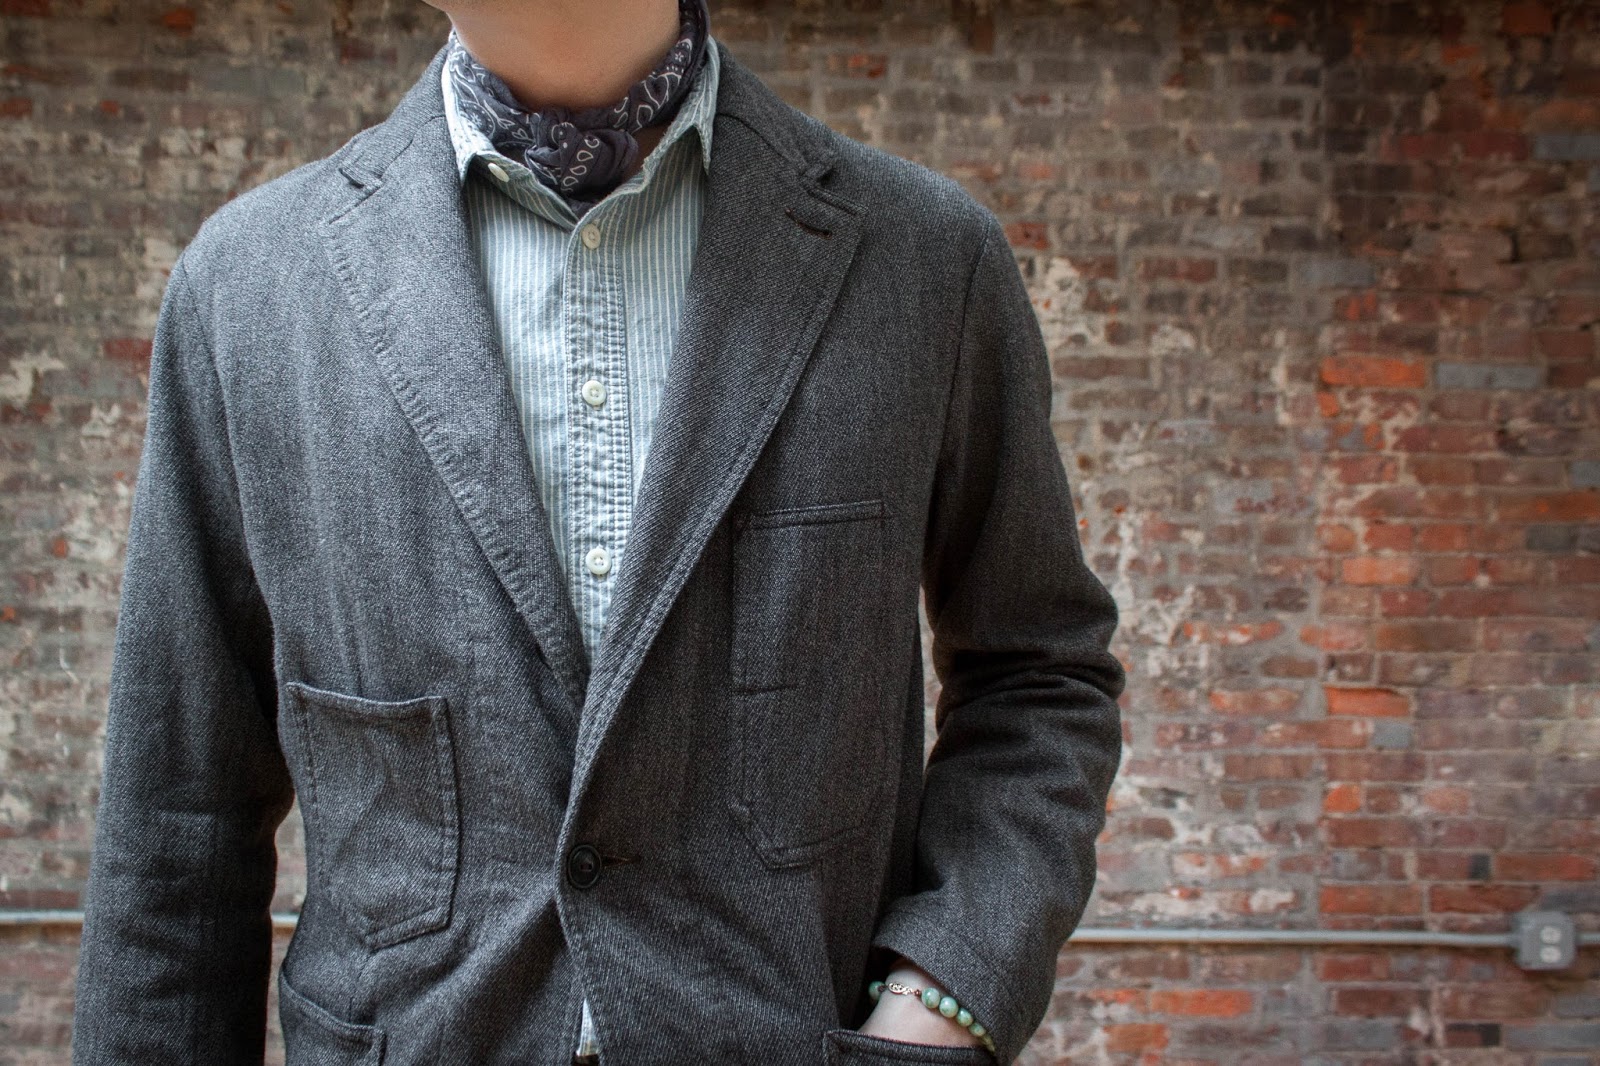 In Review: Meeting in the Middle - A Look at RRL and the Odd Sport Coat